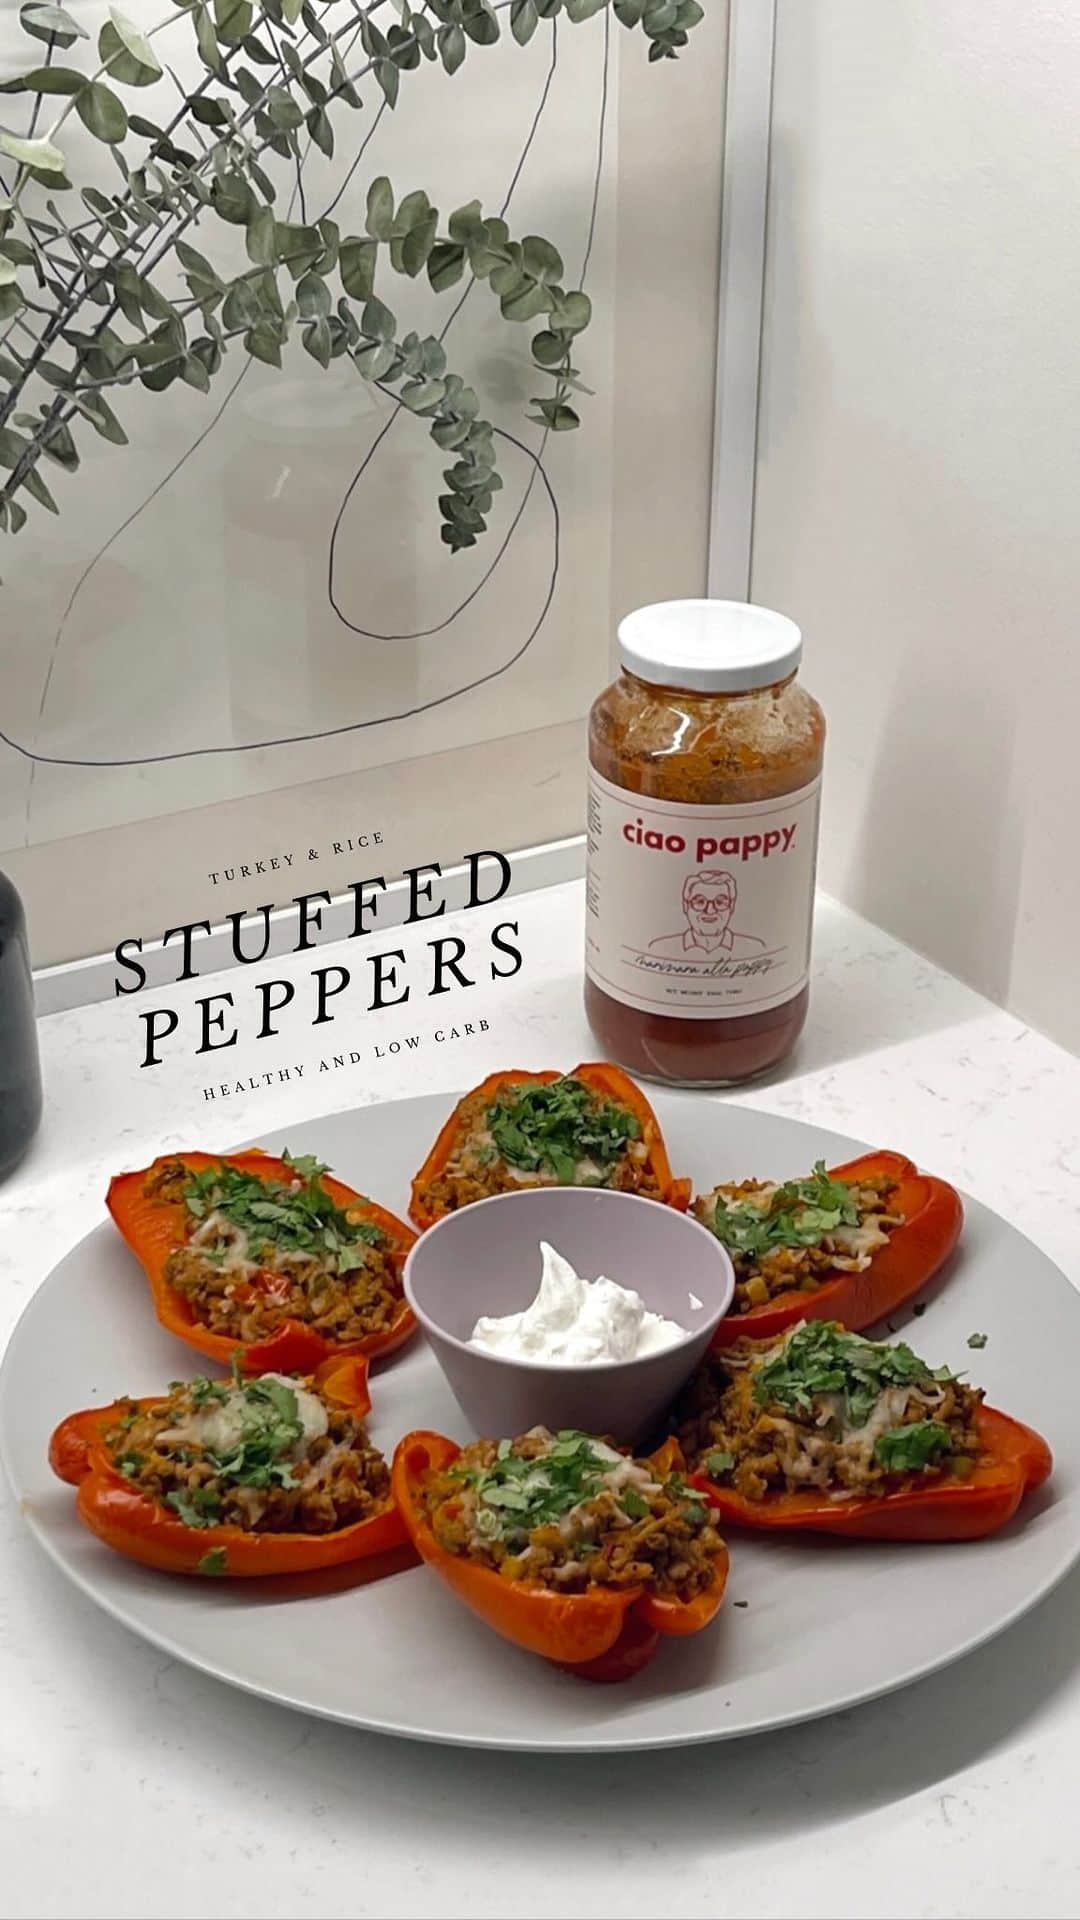 SONYA ESMANのインスタグラム：「Before trader joes sold & then discontinued (boo 👎) their beloved stuffed red peppers, my mom made them for me growing up, and as an adult I’ve made it one of my life missions to master the recipe. It’s simple to make and filled with protein to keep you strong & eatin good all week. All you need is some red peppers, garlic, a yellow onion, rice and your favorite marinara. Truthfully when I was learning to make these and experimenting with the recipe- I learned quickly that canned tomatoes, which is what most recipes call for, didn’t work for me. It didn’t taste the way I remembered it. Which is why I love @ciaopappy marinara for how well-spiced, authentic and fresh it tastes on everything from pasta to these stuffed peppers. I don’t see how this recipe couldn’t be life-changing if you’ve never tried them <3 @fromthelobby  Ingredients: * 3–4 large bell peppers, insides removed * 1 tablespoon olive oil * 1 pound ground turkey (feel free to use your vegan ground “meat” of choice) * 1/2 diced yellow onion * 3 cloves garlic, minced * Italian seasoning * Salt, to taste * Freshly cracked black pepper * Crushed red pepper flakes * Ciao Pappy Marinara Sauce * 1 cup cooked brown rice or cauliflower rice (I used TJ’s frozen Mexican cauliflower rice) * Mozzarella cheese  * Preheat oven to 375 degrees. Place the peppers in a pot of boiling water for about 10 mins * 1. Heat a large deep skillet over medium-high heat. Once hot, add the olive oil and then ground turkey. Brown the turkey, breaking it up as it cooks. *I added the onions and garlic first, but it took longer to cook, so add the turkey first* 2. Once the turkey is brown, add the diced onion, minced garlic, Italian seasoning, salt, black pepper, and red pepper flakes. Cook for 3-4 more minutes or until the onion is tender. 3. Stir in the brown rice and add the marinara sauce. Let the sauce simmer for 2-3 more minutes. Remove from the heat and add cheese. 4. Stuff the pepper halves with the filling and place them on a baking sheet. 5. Bake uncovered at 375 degrees for 20-25 minutes. 6. Remove from the oven and garnish with fresh cilantro or parsley, hot sauce if you love spicy food, and eat with sour cream #ourplace」